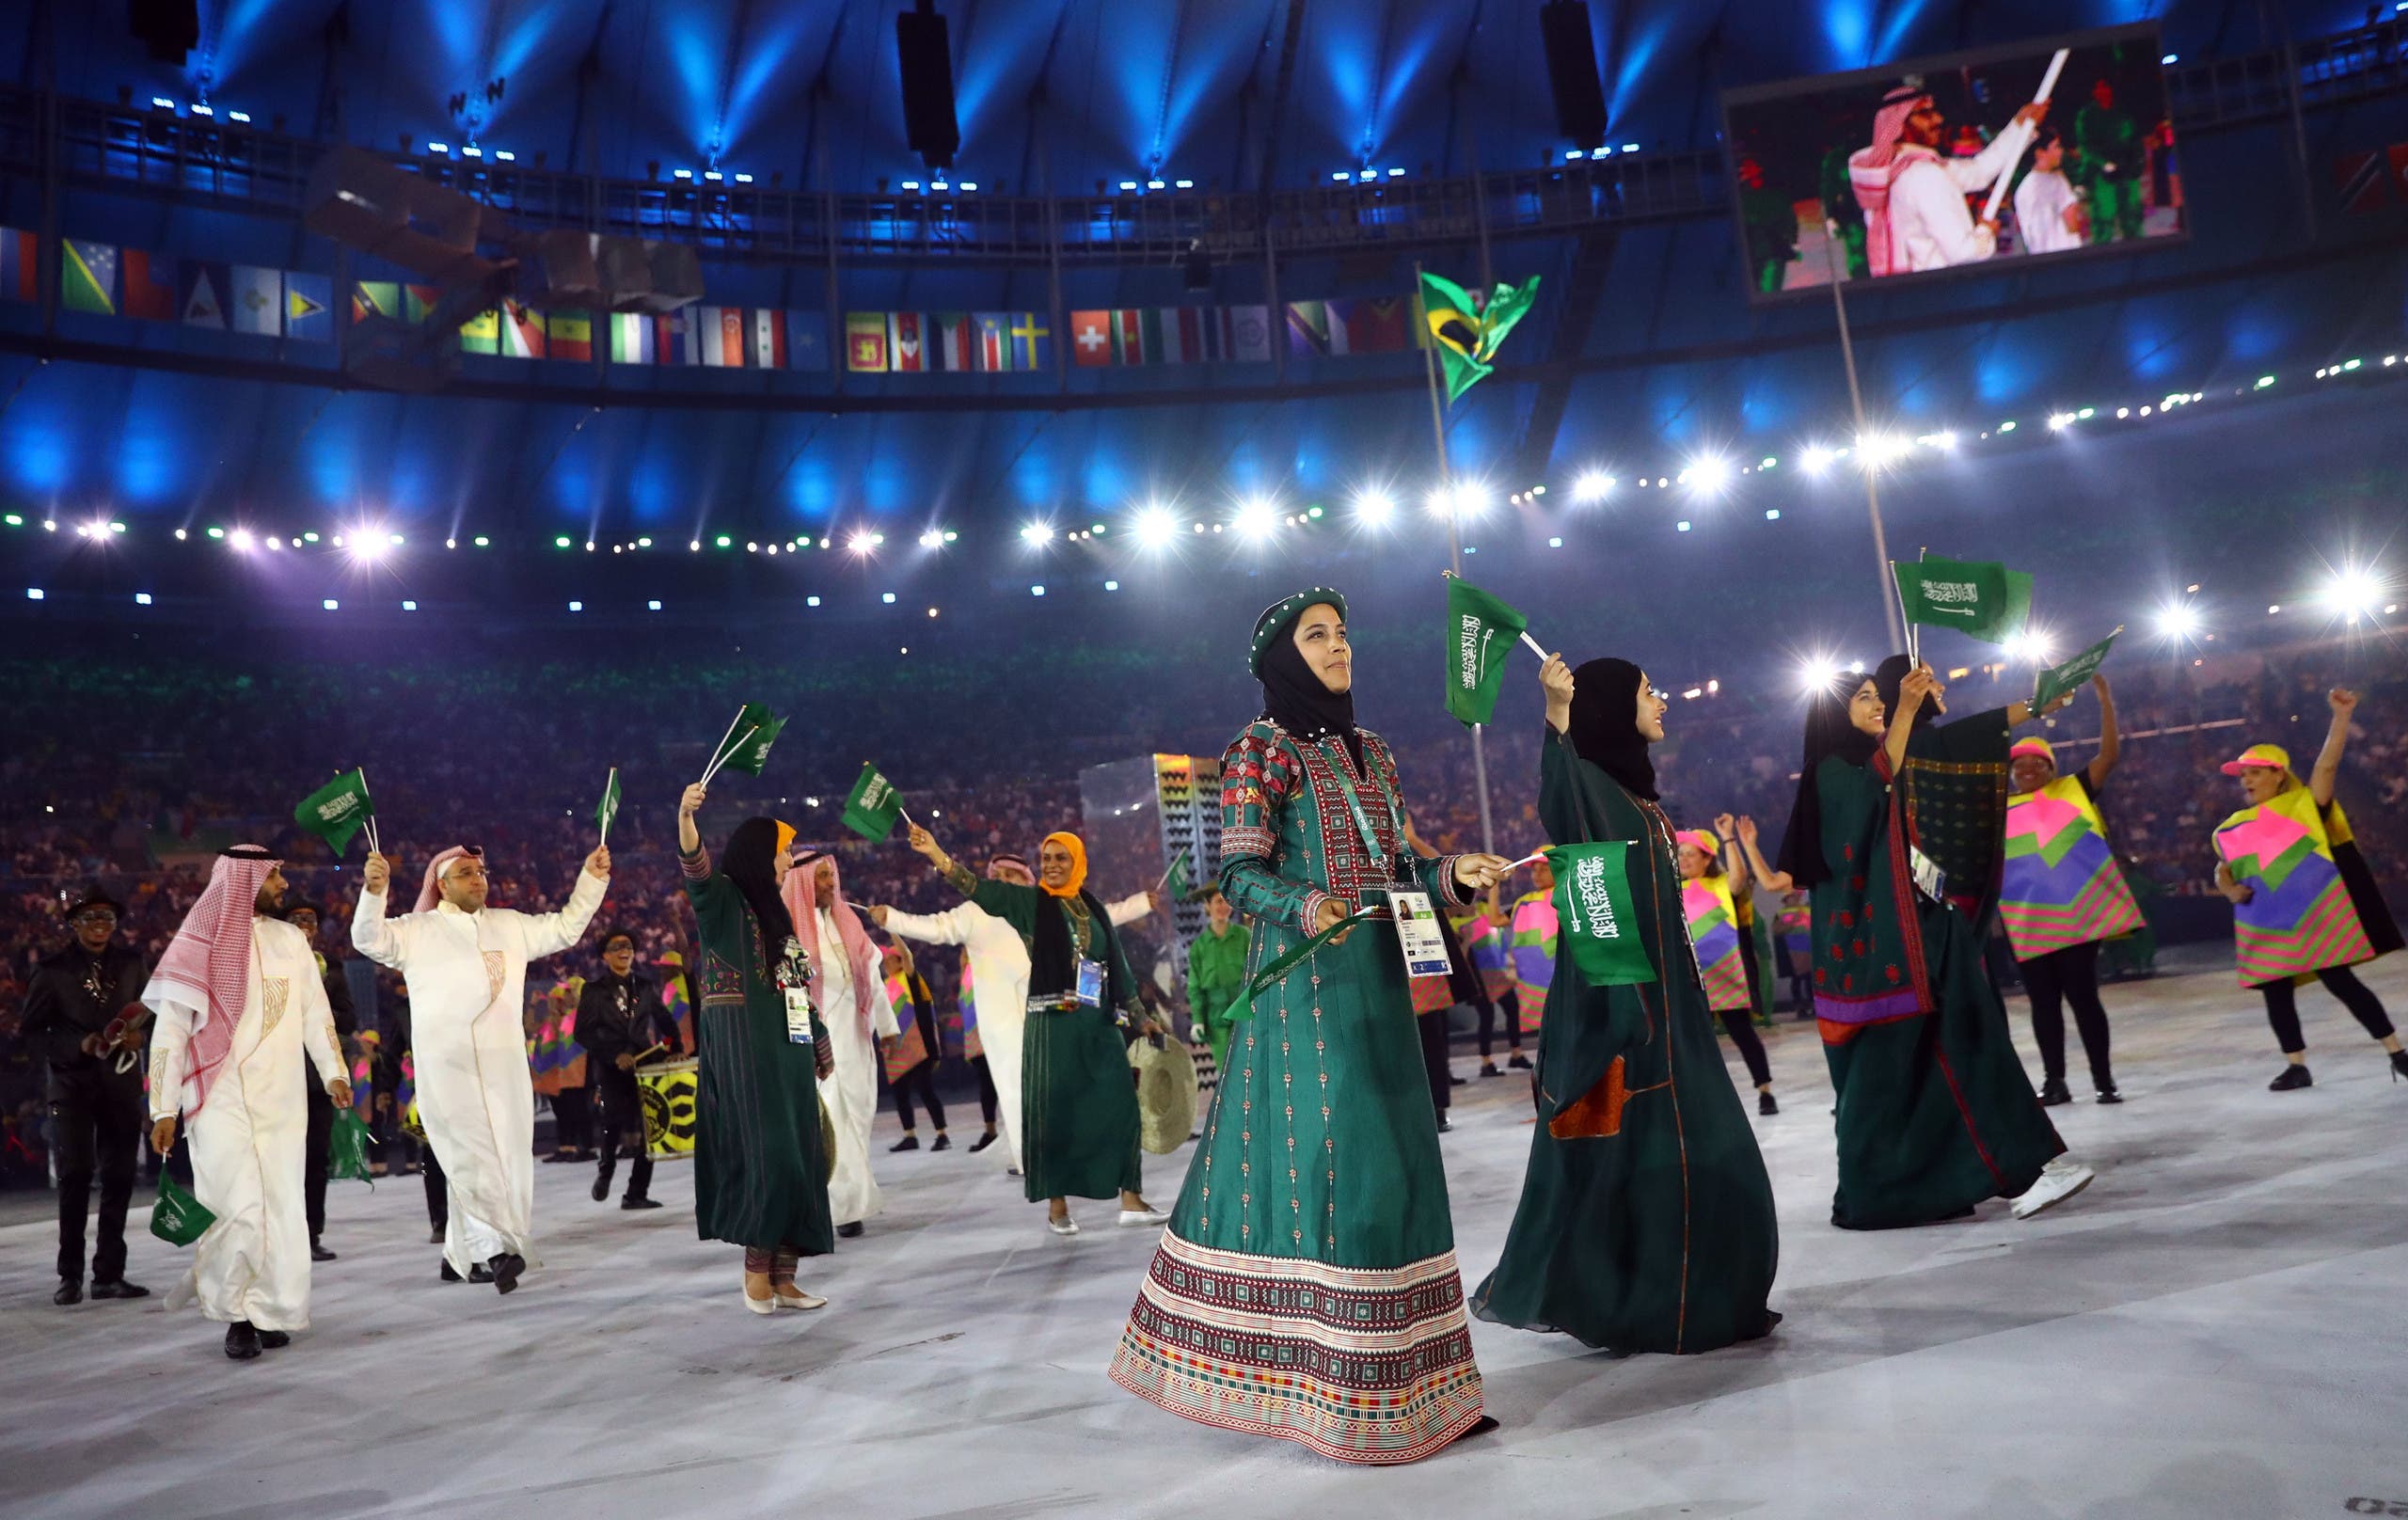 Arab states fly their flags at Rio opening 2016 